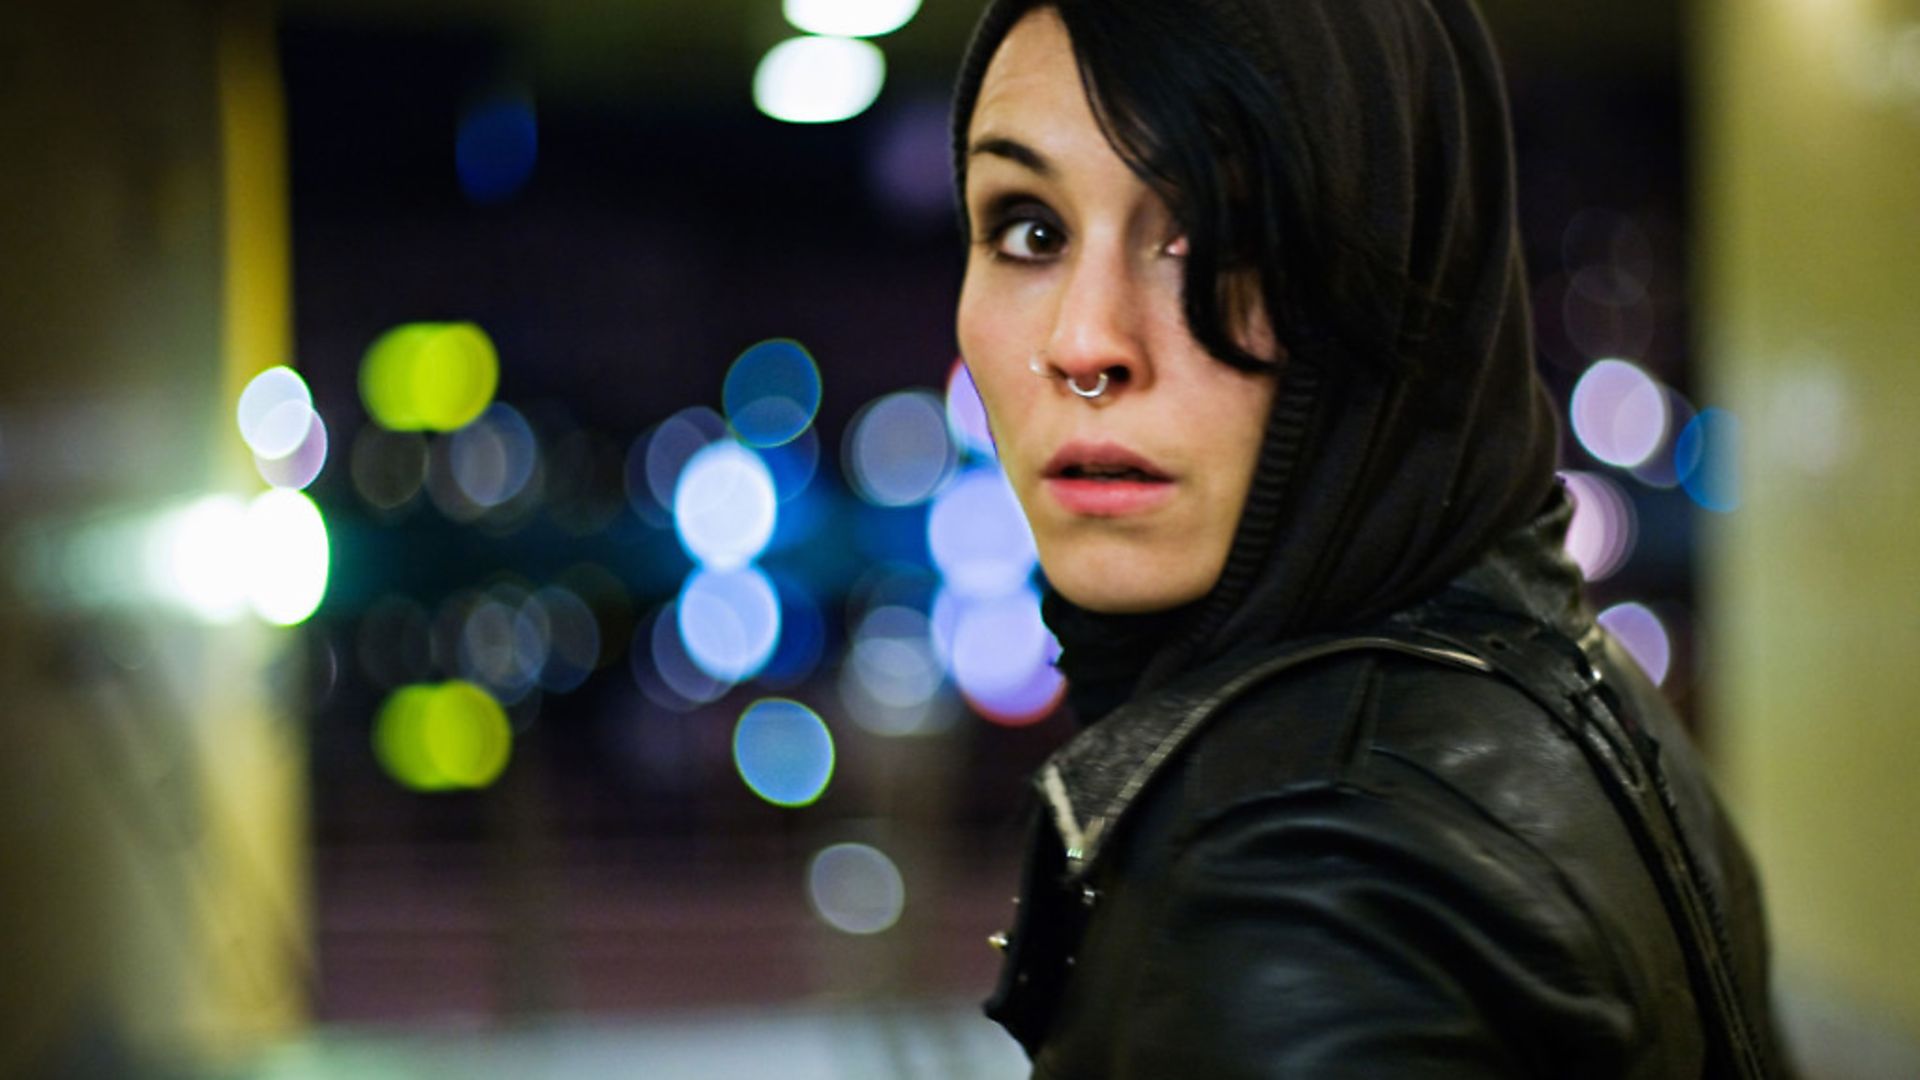 Noomi Rapace as Lisbeth Salander in The Girl with the Dragon Tattoo (2009). Photograph: IMDB